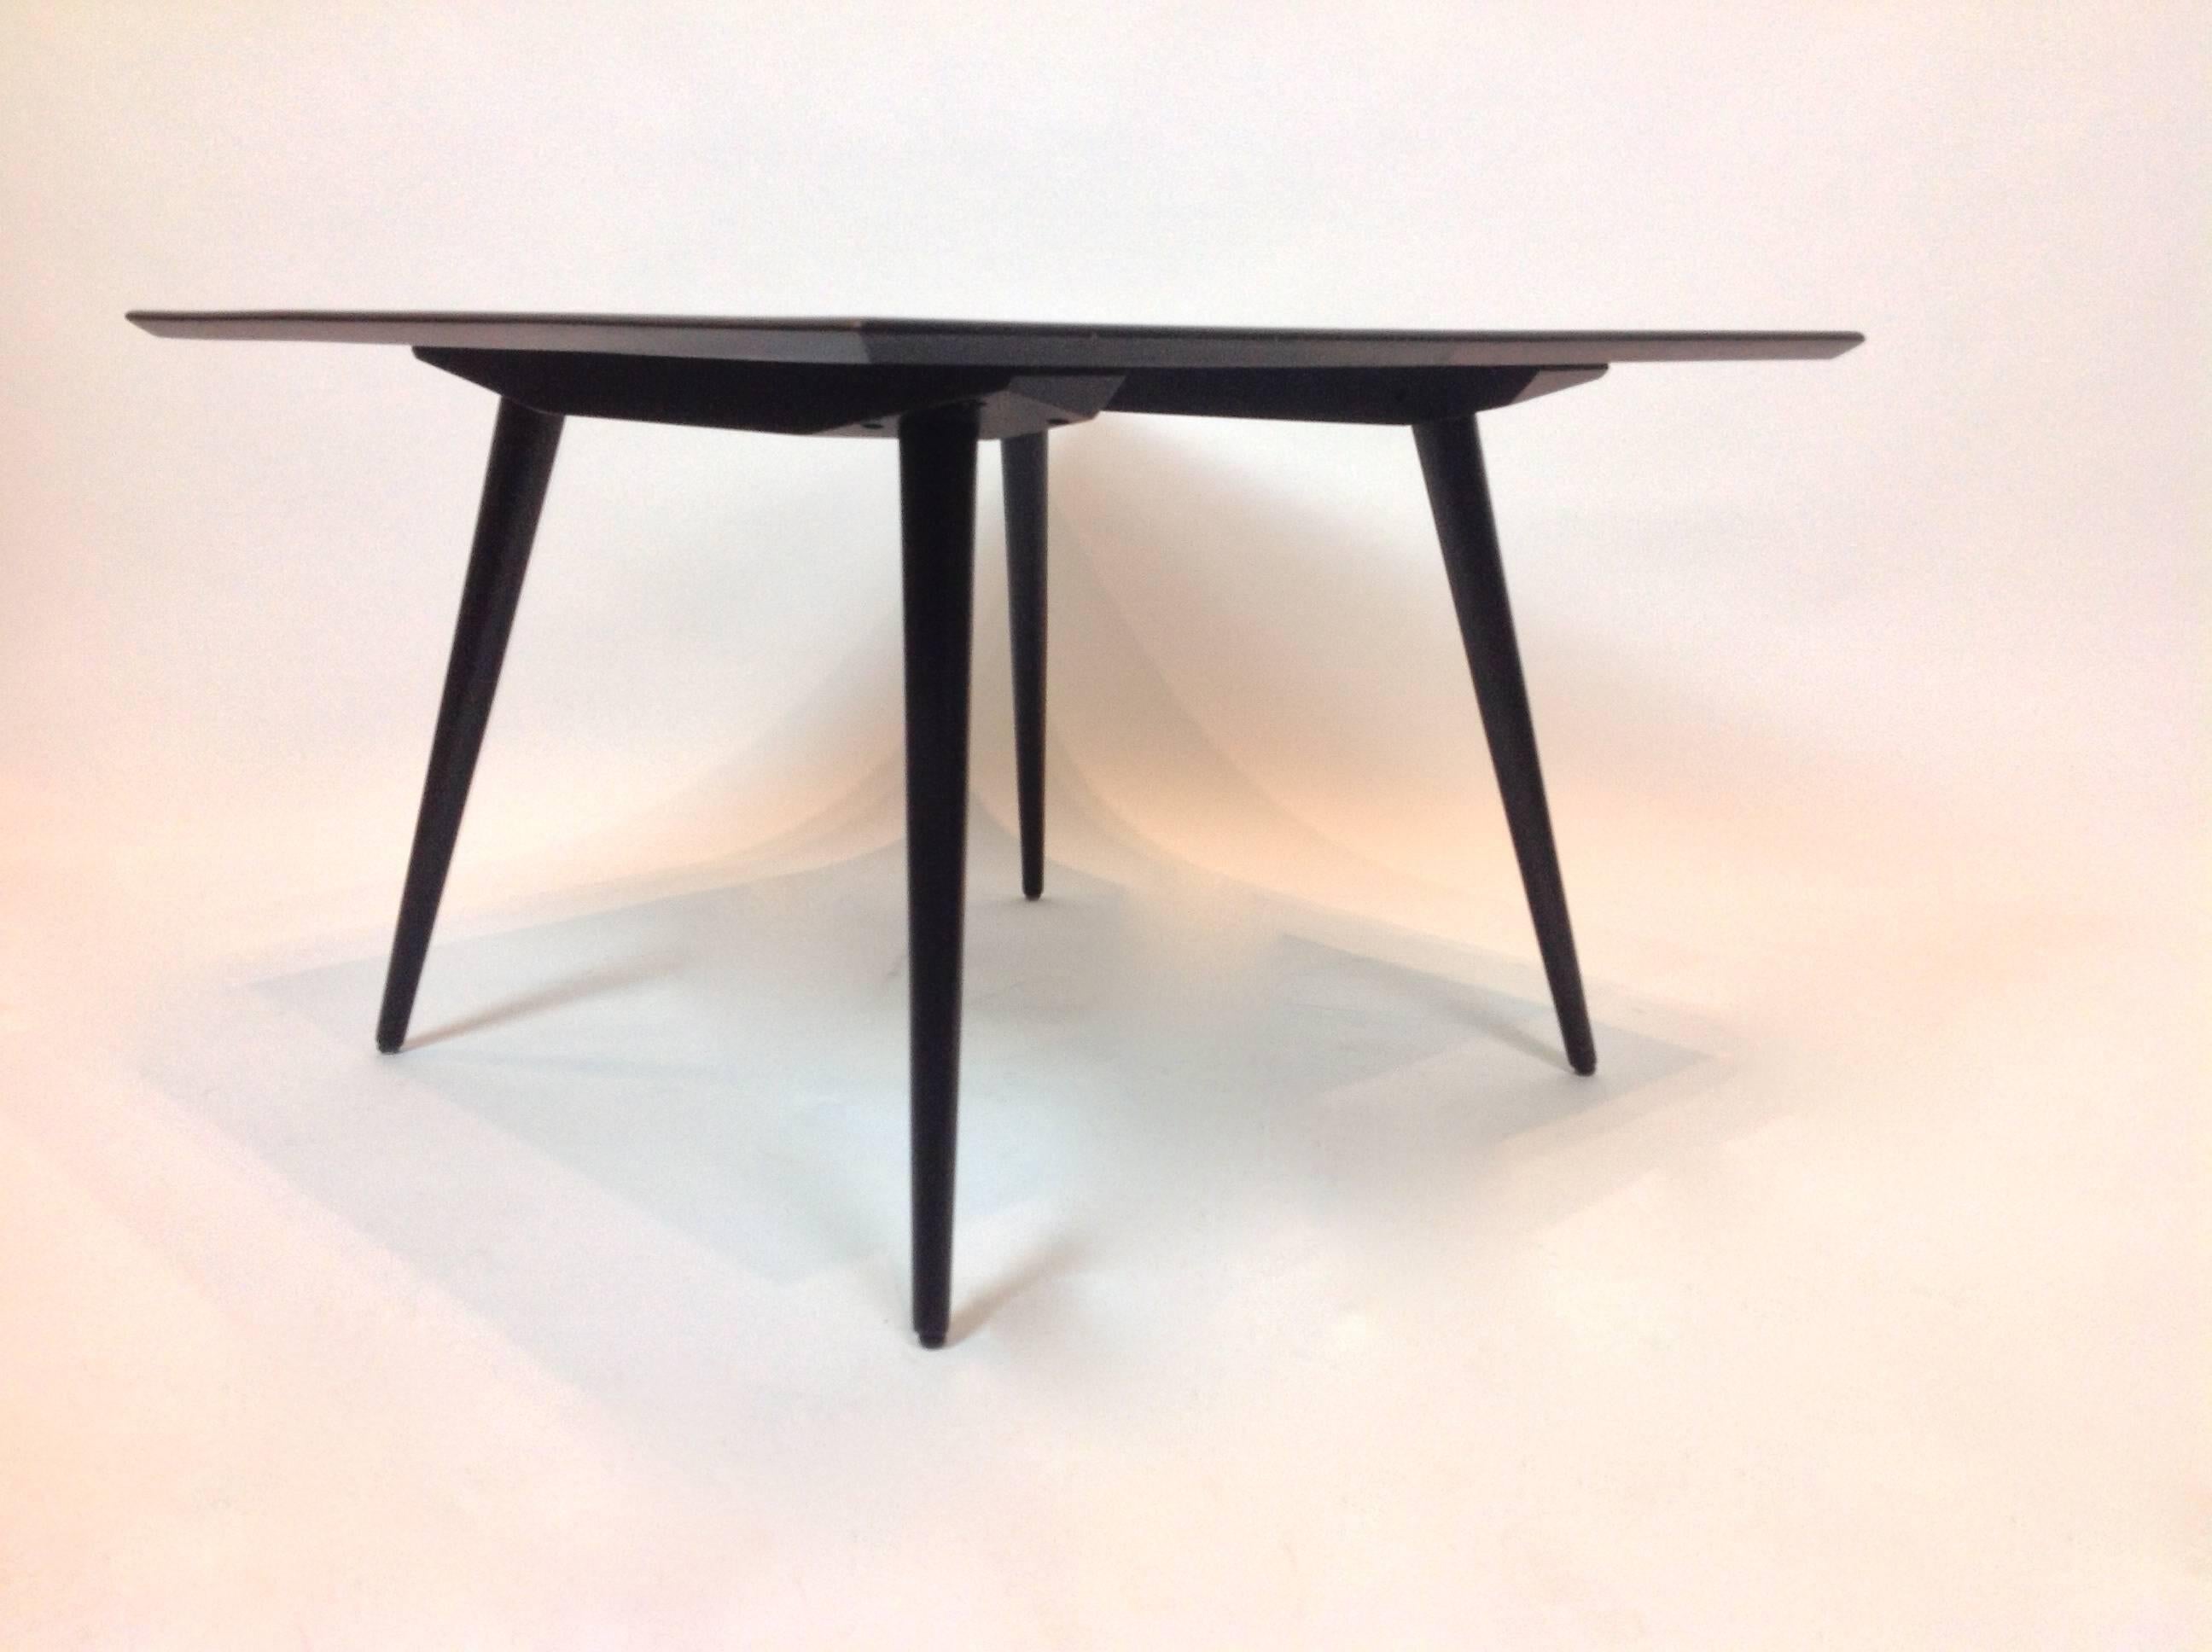 Elegant in its simplicity, this side table was designed in the 1950s by Paul McCobb for the Planner Group. Made of solid maple wood finished with matte black paint. Table is a perfect square with finely tapered legs and an under-bevelled top surface.